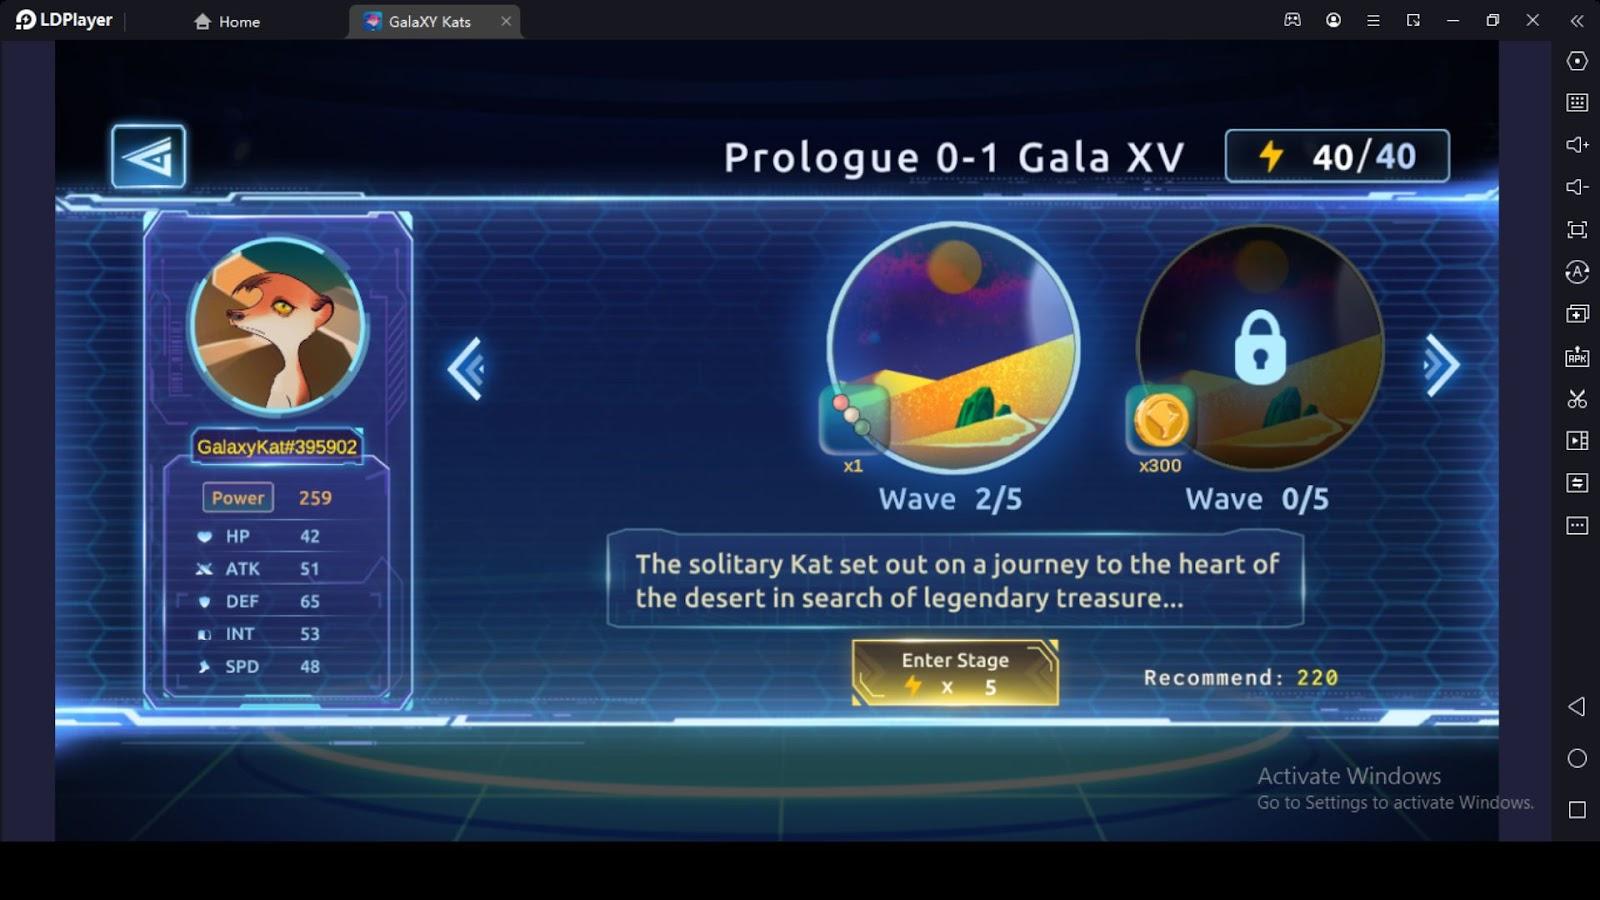 Galaxy Kats - Resurgence Beginner Guide to Races and Stats